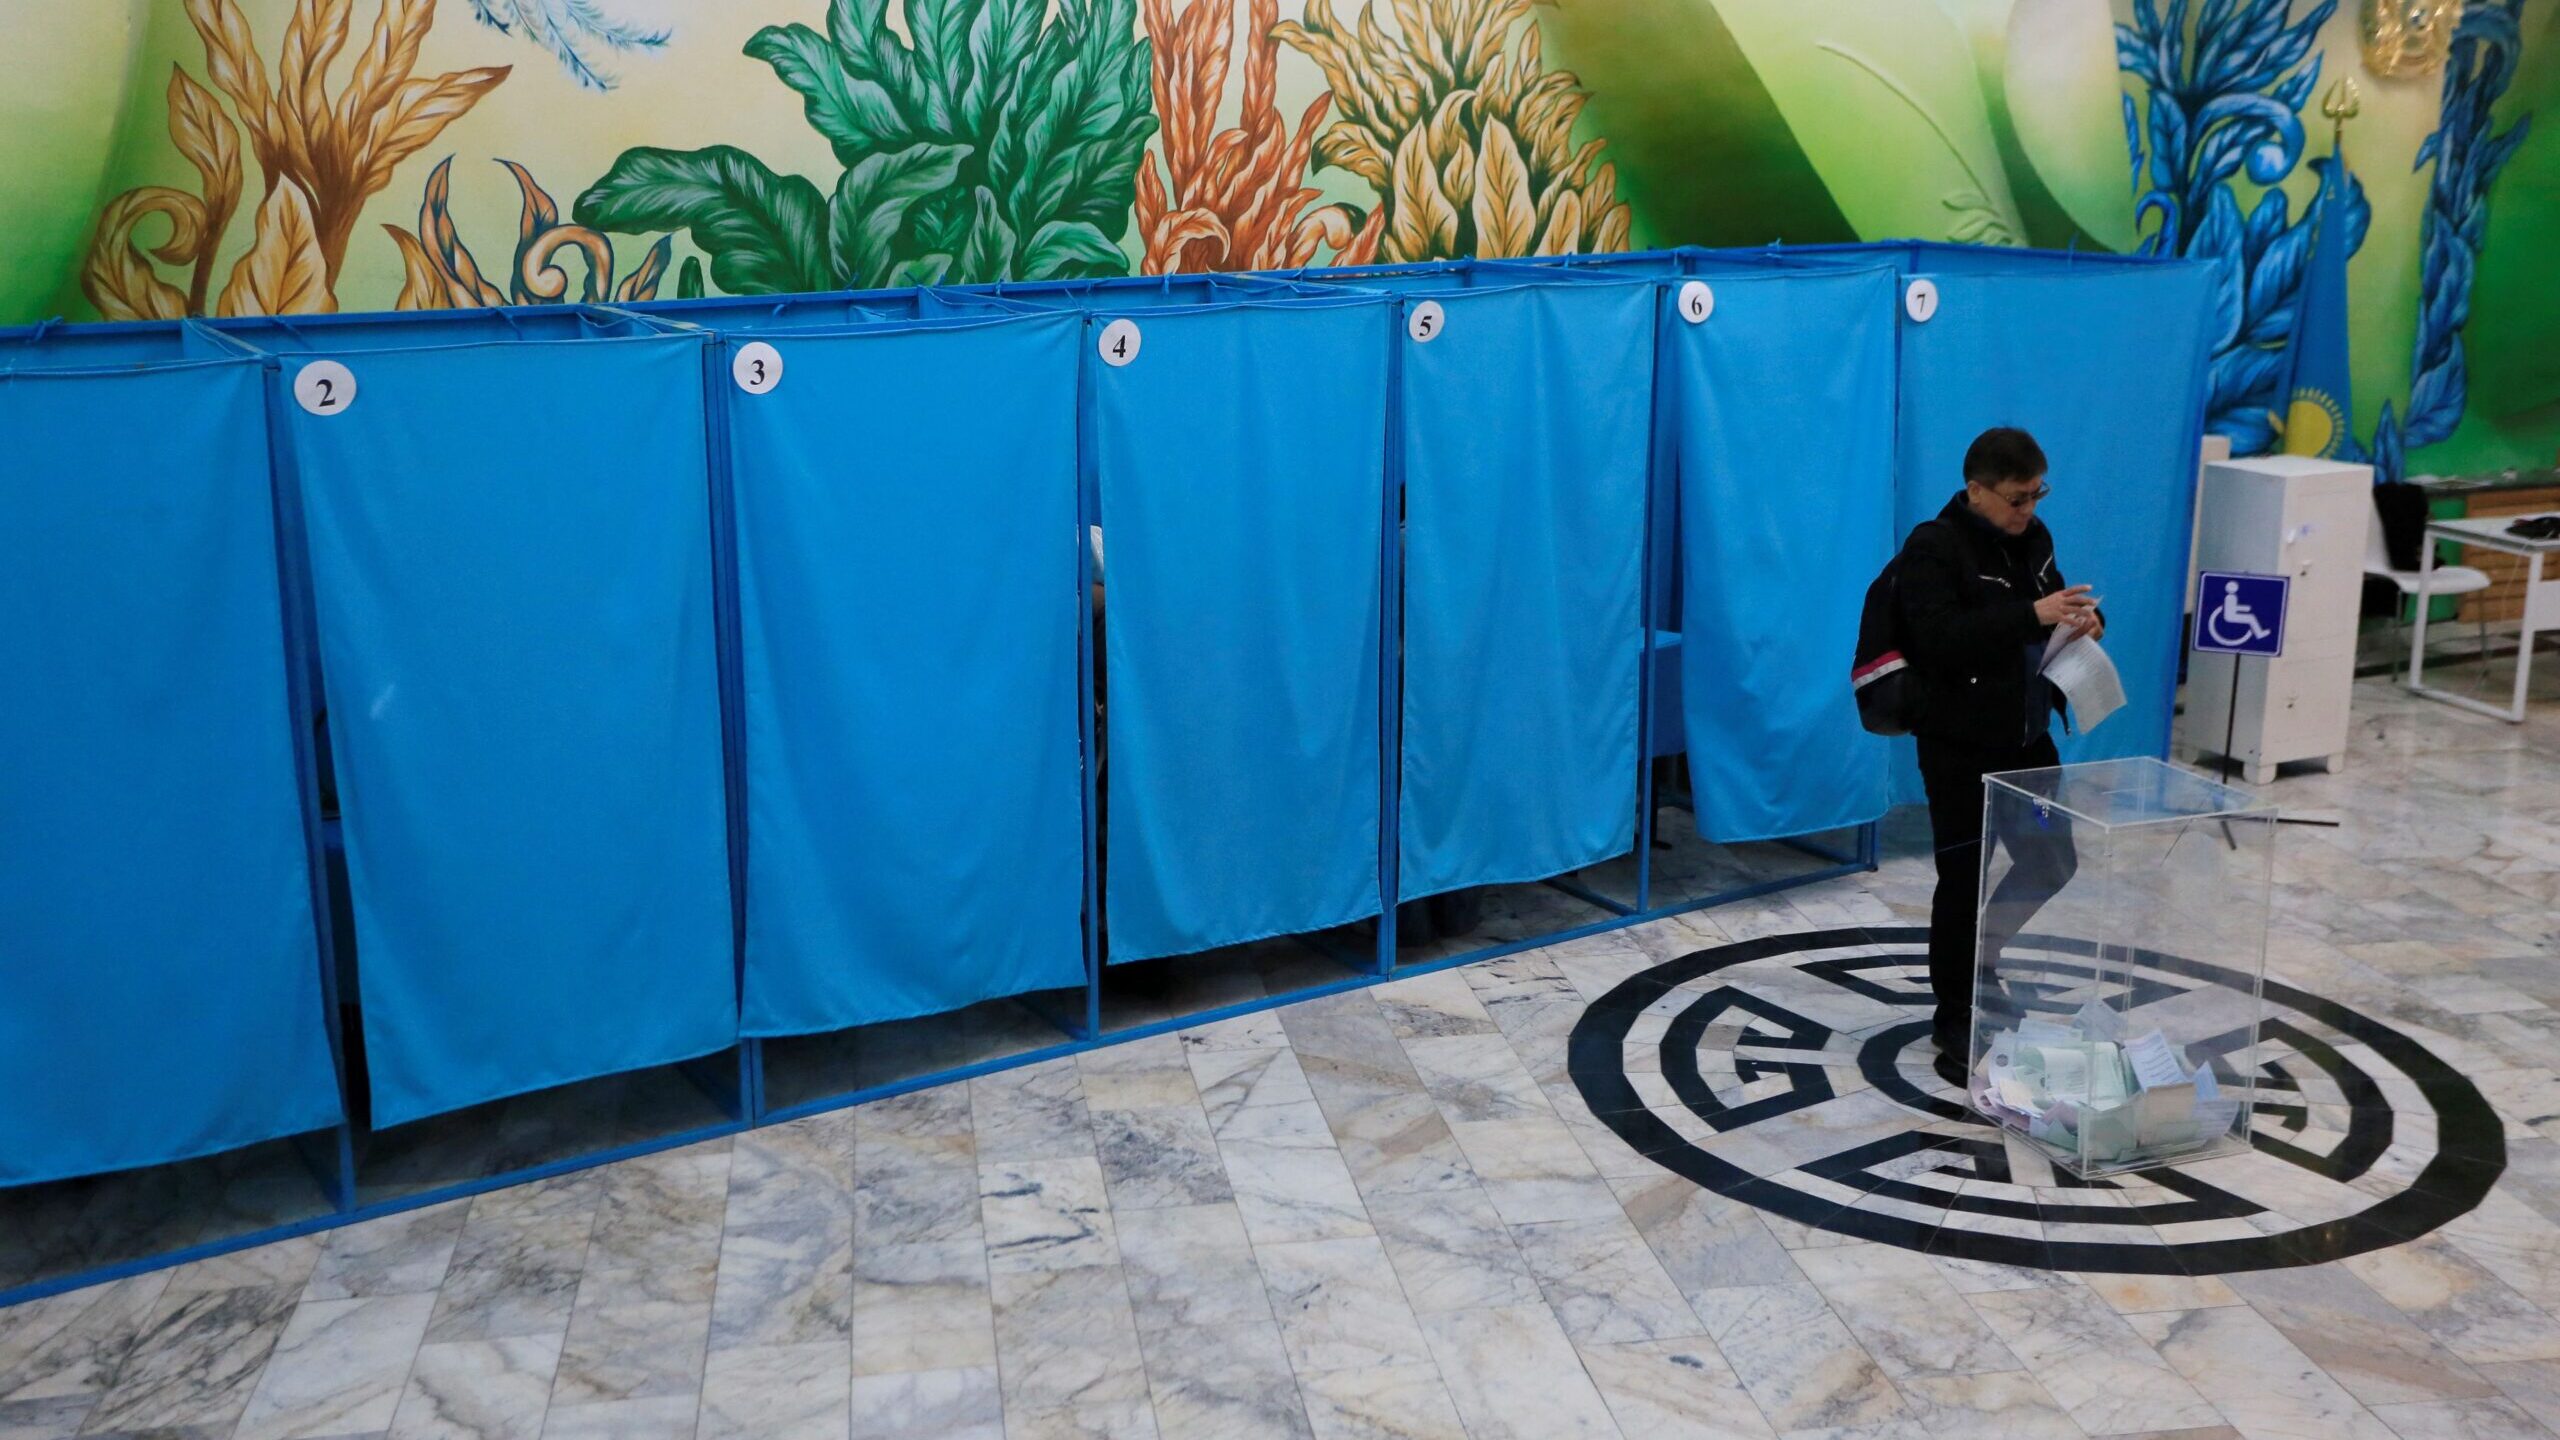 Kazakhstan Goes to the Polls in Parliamentary, Local Elections